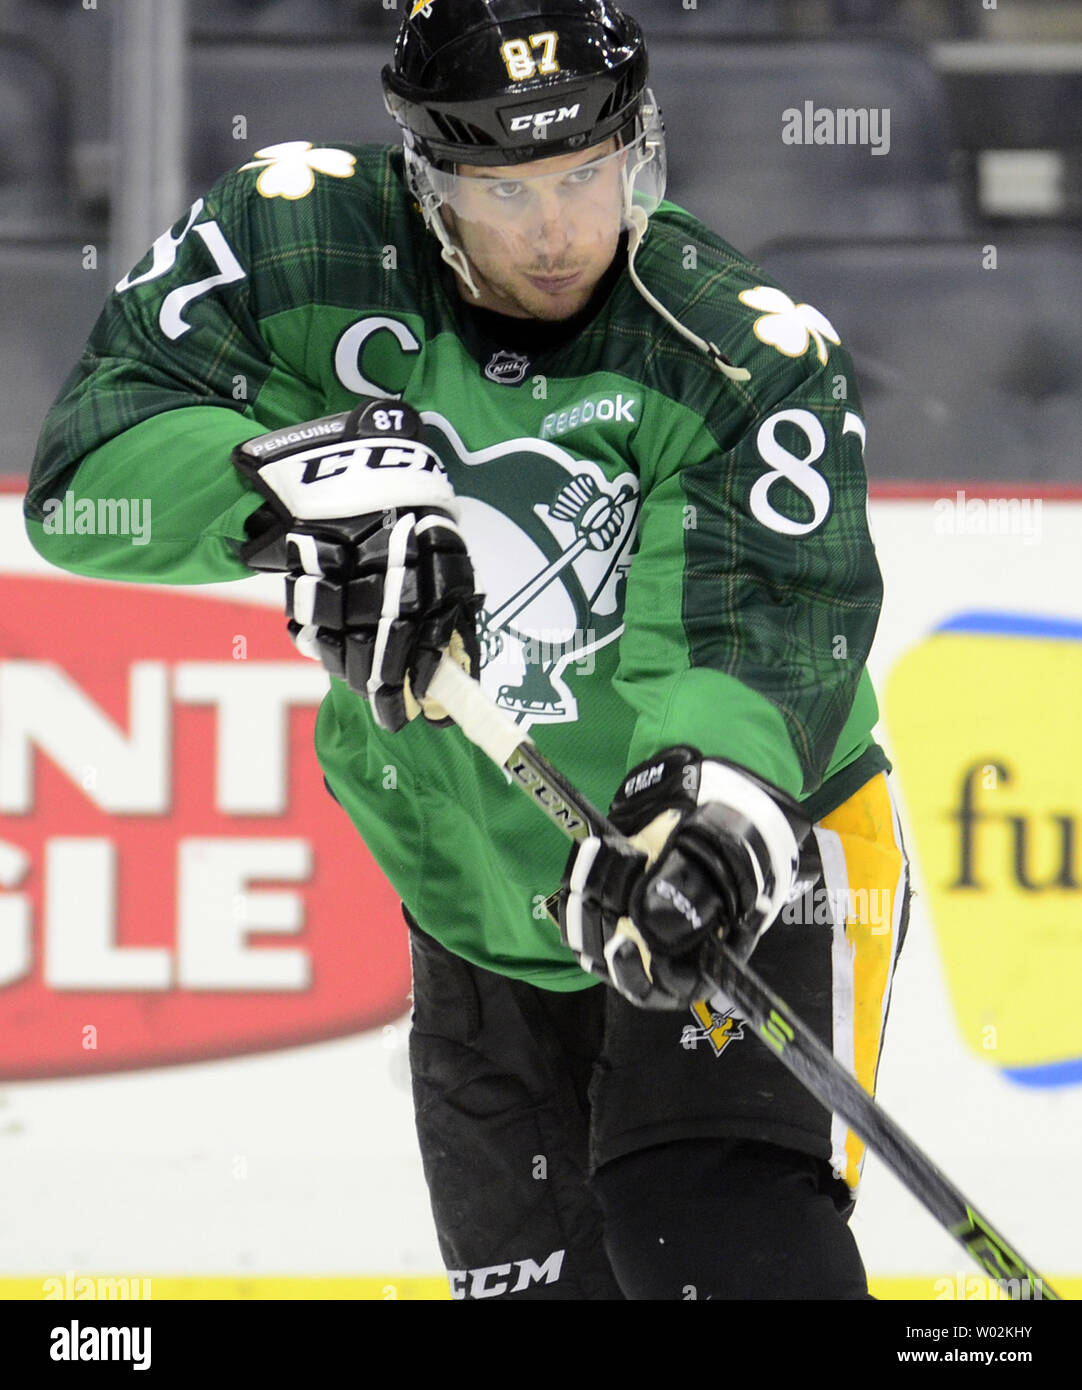 Blackhawks will warm-up in St. Patrick's Day green jerseys on Wednesday